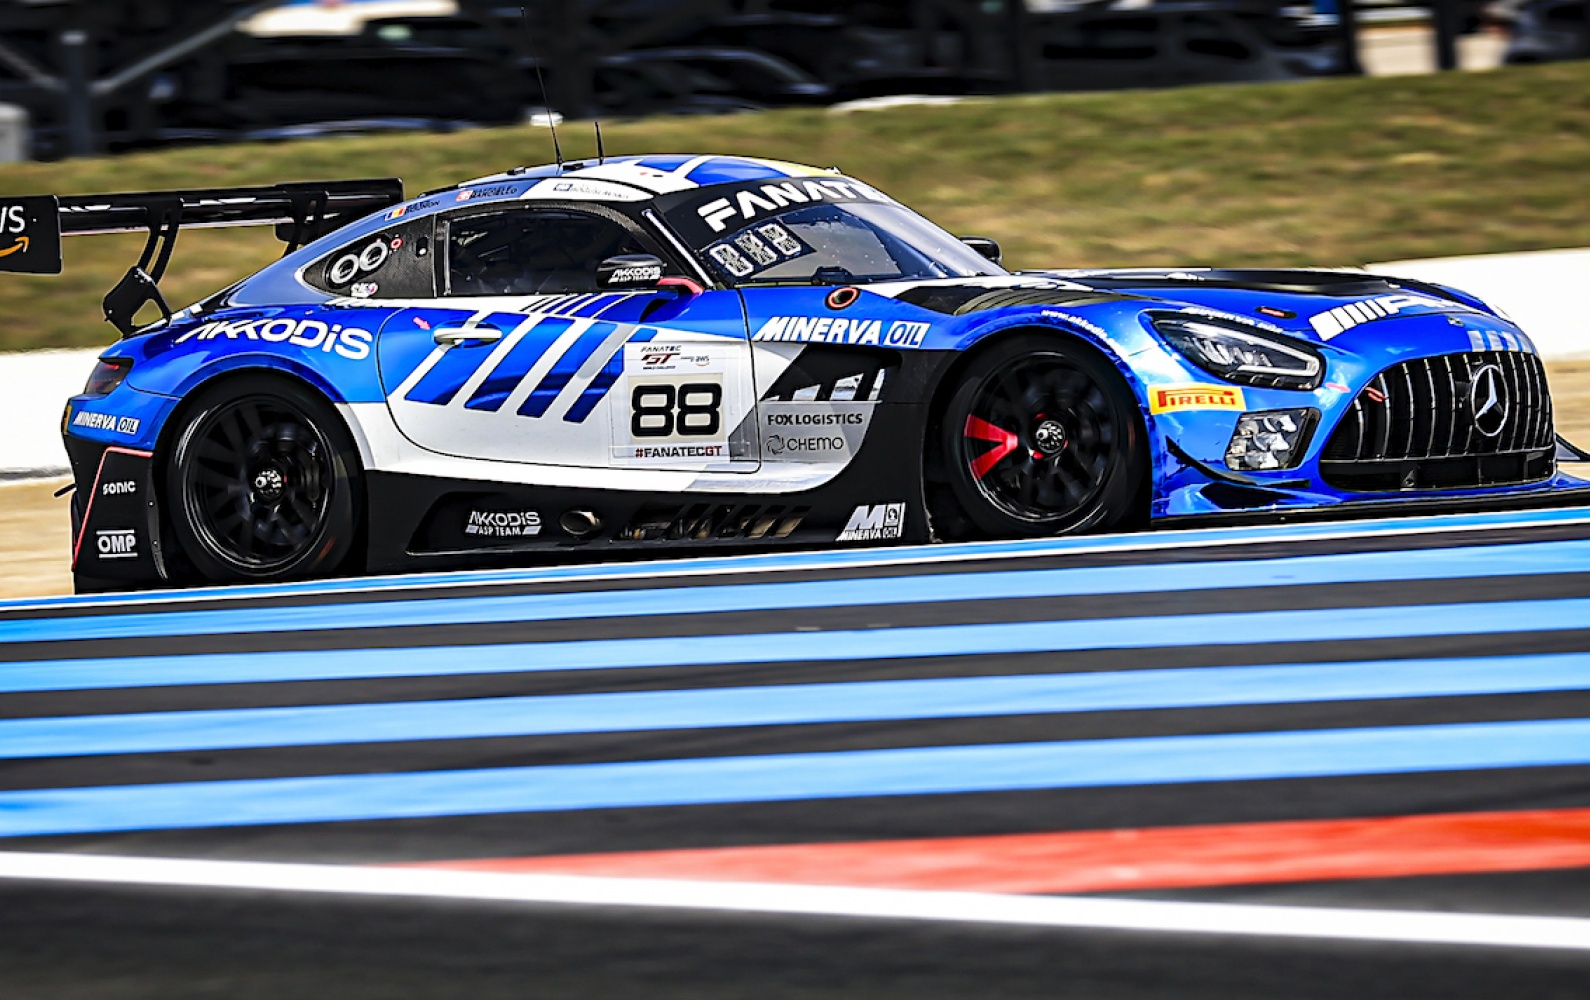 Fanatec GT World - Endurance (Paul Ricard) - From pole to victory with panache!